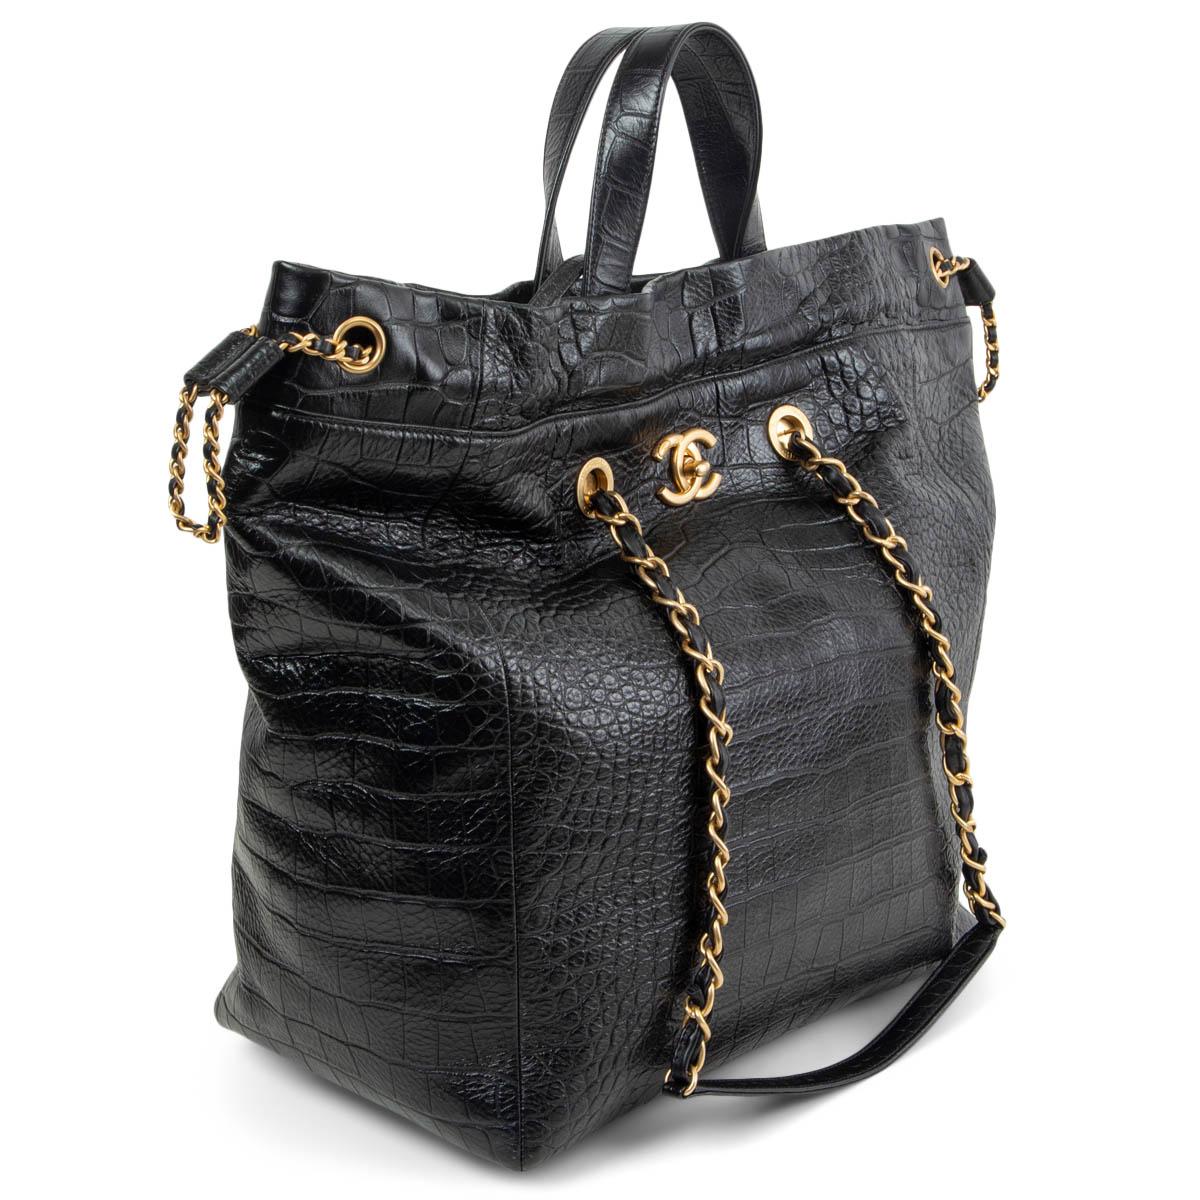 100% authentic Chanel Large Shopping Tote in black croco embossed calfskin with gold-tone hardware. The bag features an interlocking CC turn lock, chain link shoulder straps threaded with leather and leather top handles. The cinch cord opening at